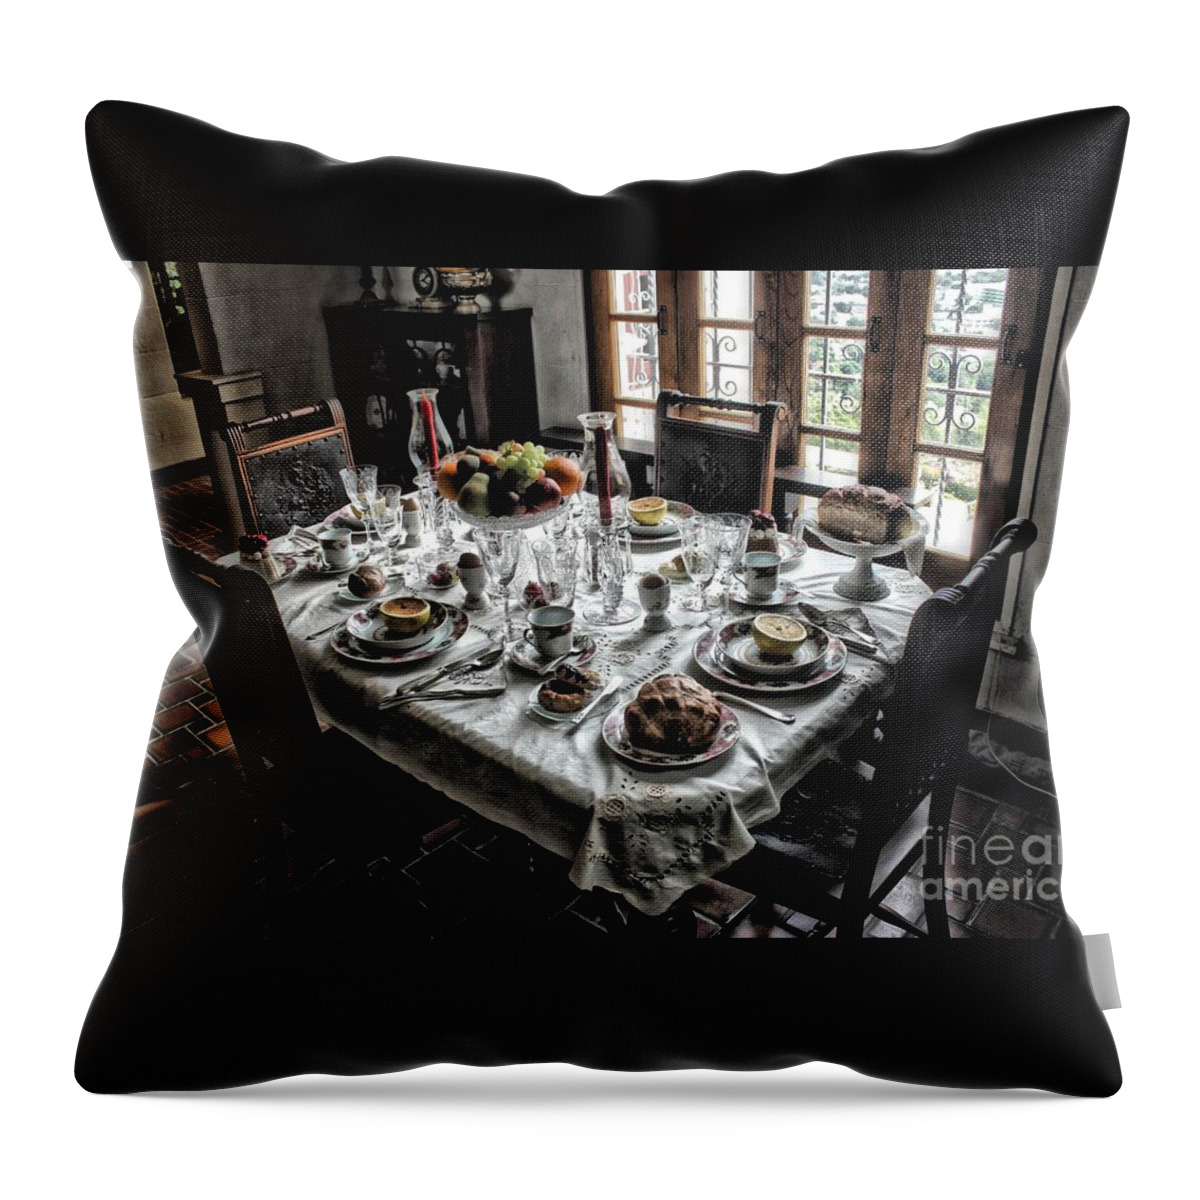 Photography Throw Pillow featuring the photograph Downton Abbey Breakfast by Alice Terrill